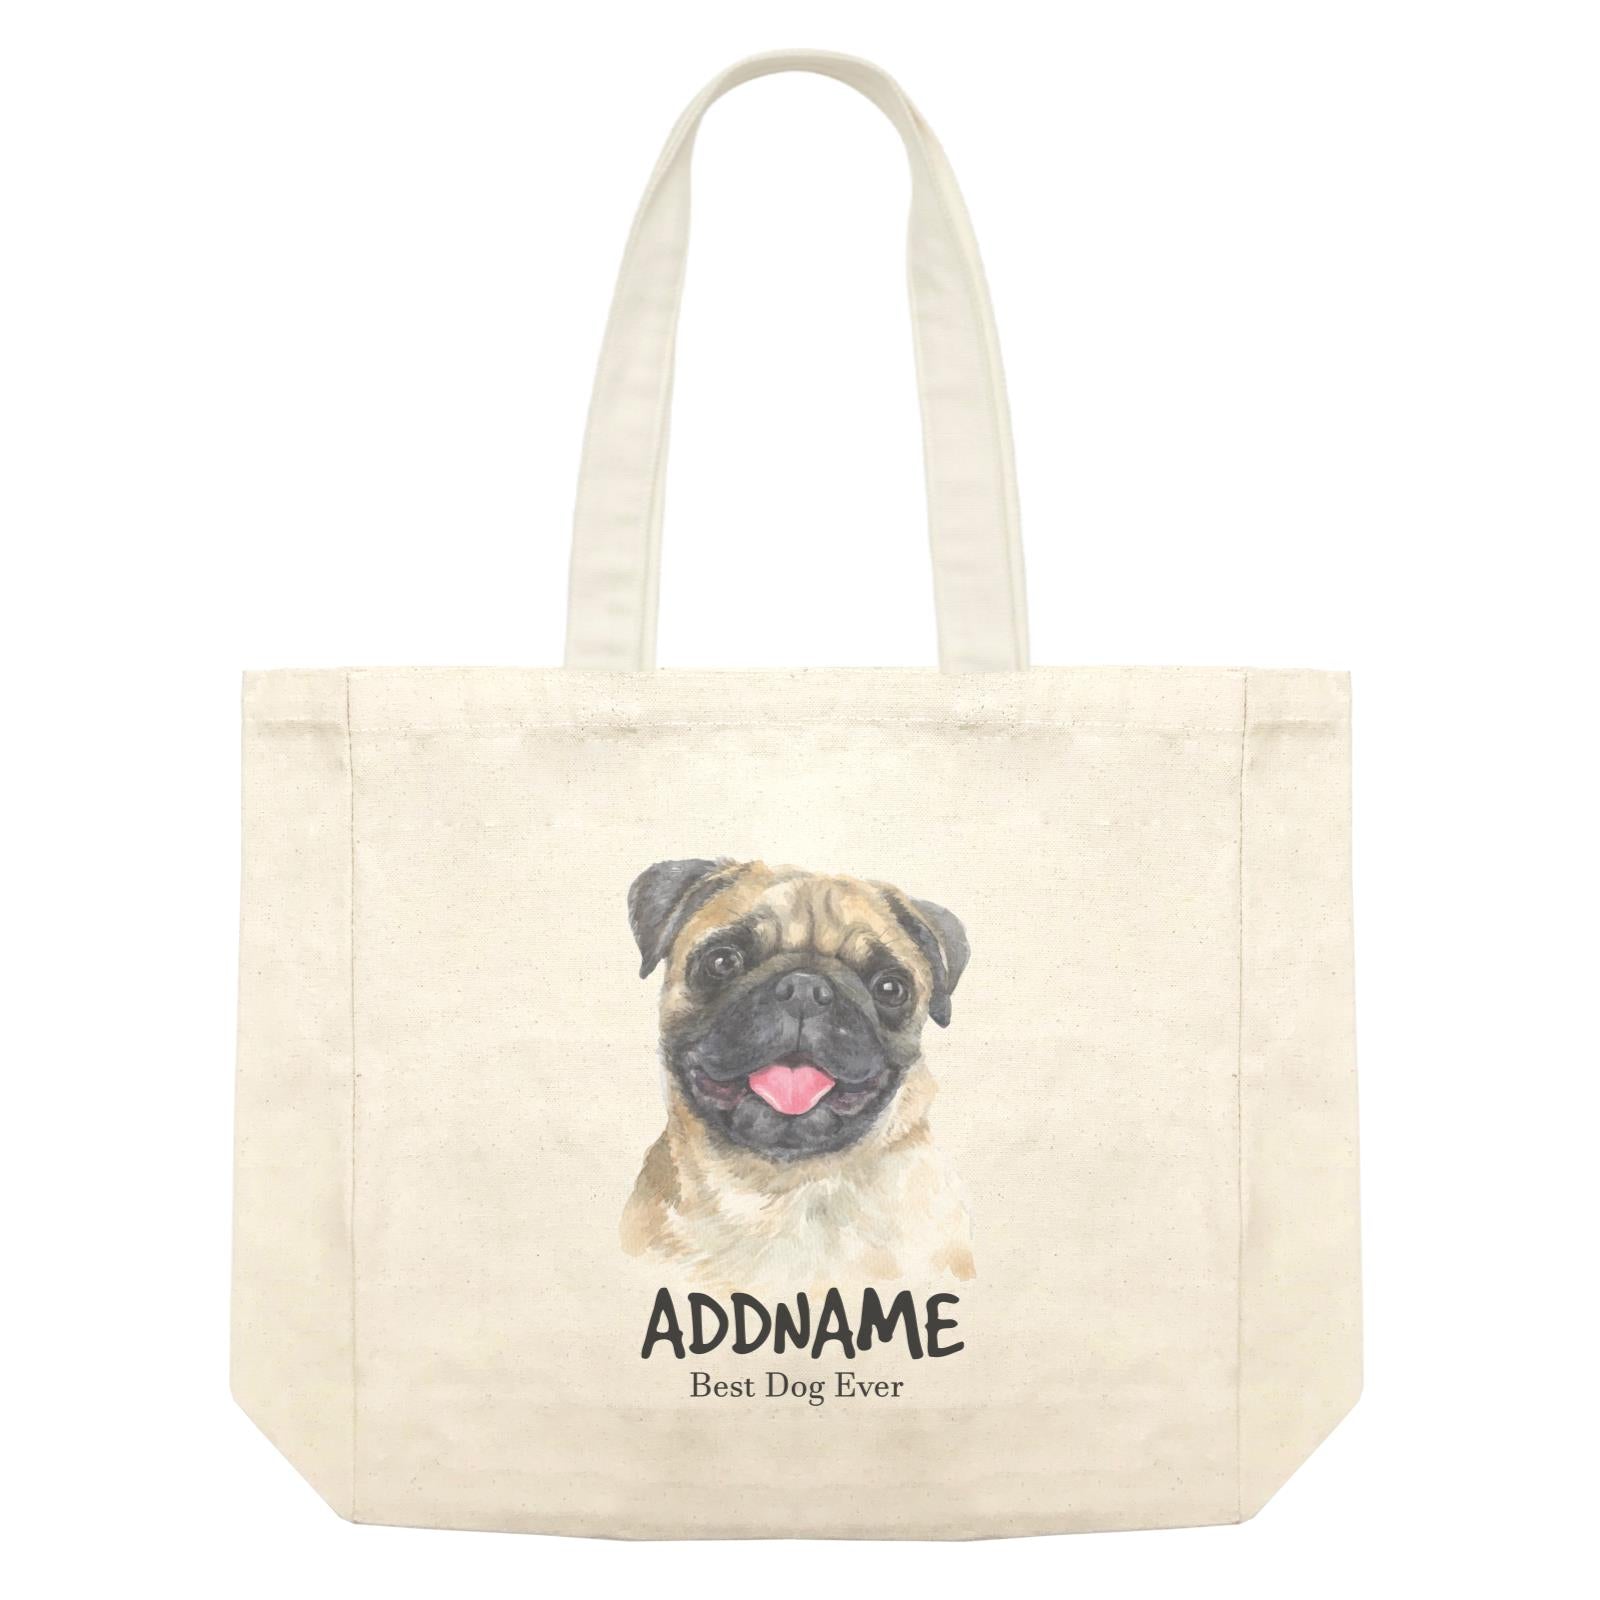 Watercolor Dog Pug Happy Best Dog Ever Addname Shopping Bag